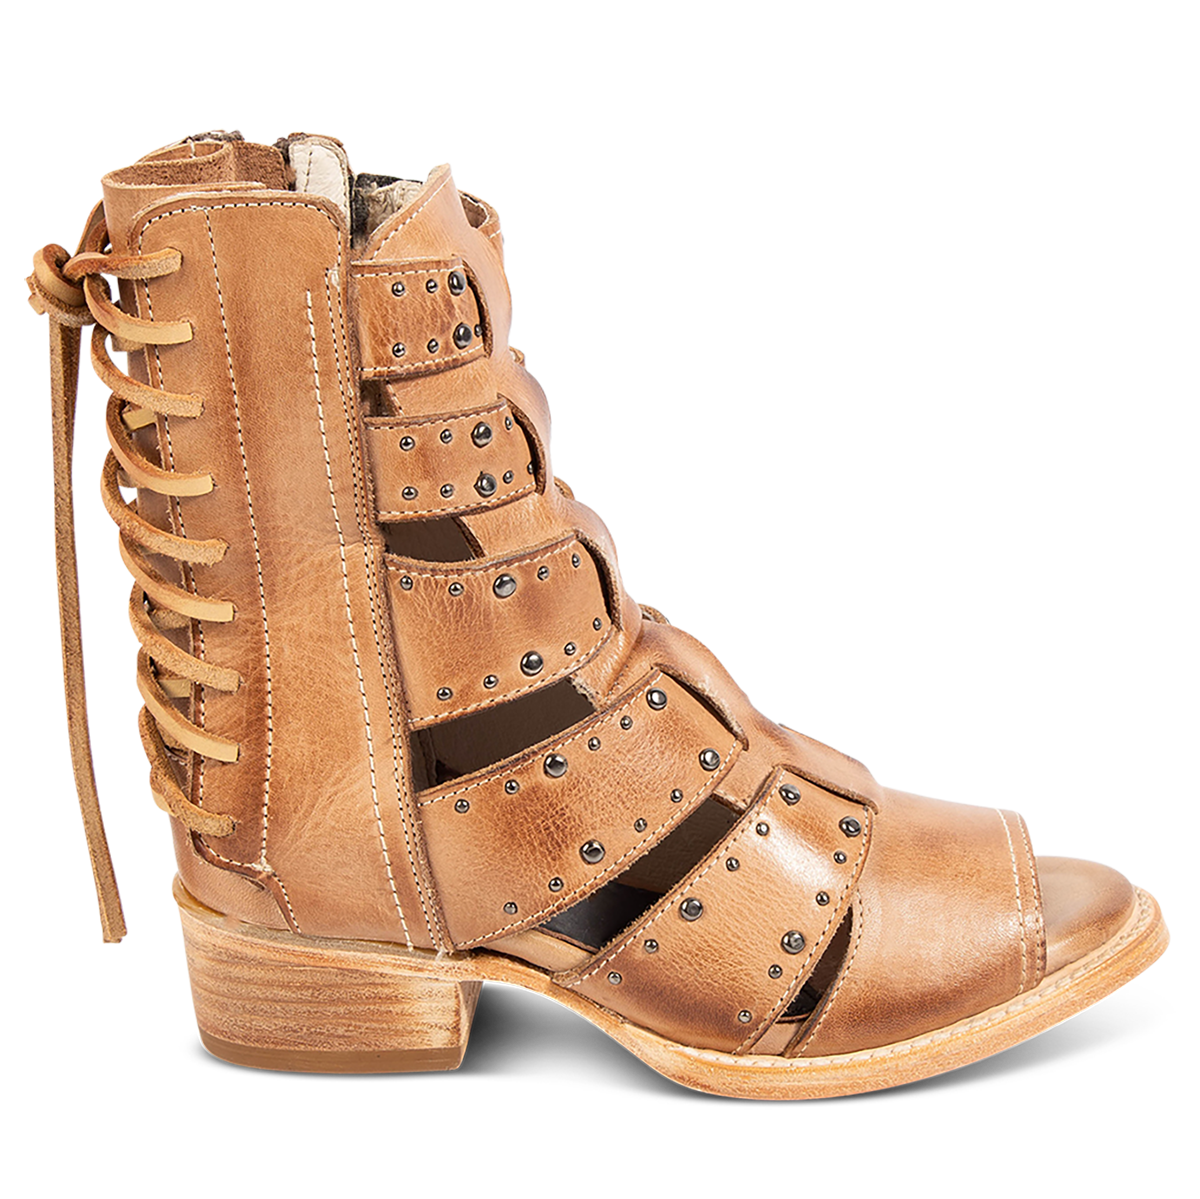 FREEBIRD women's Ghost natural leather sandal with an inside working brass zipper, back panel lacing and an exposed exterior